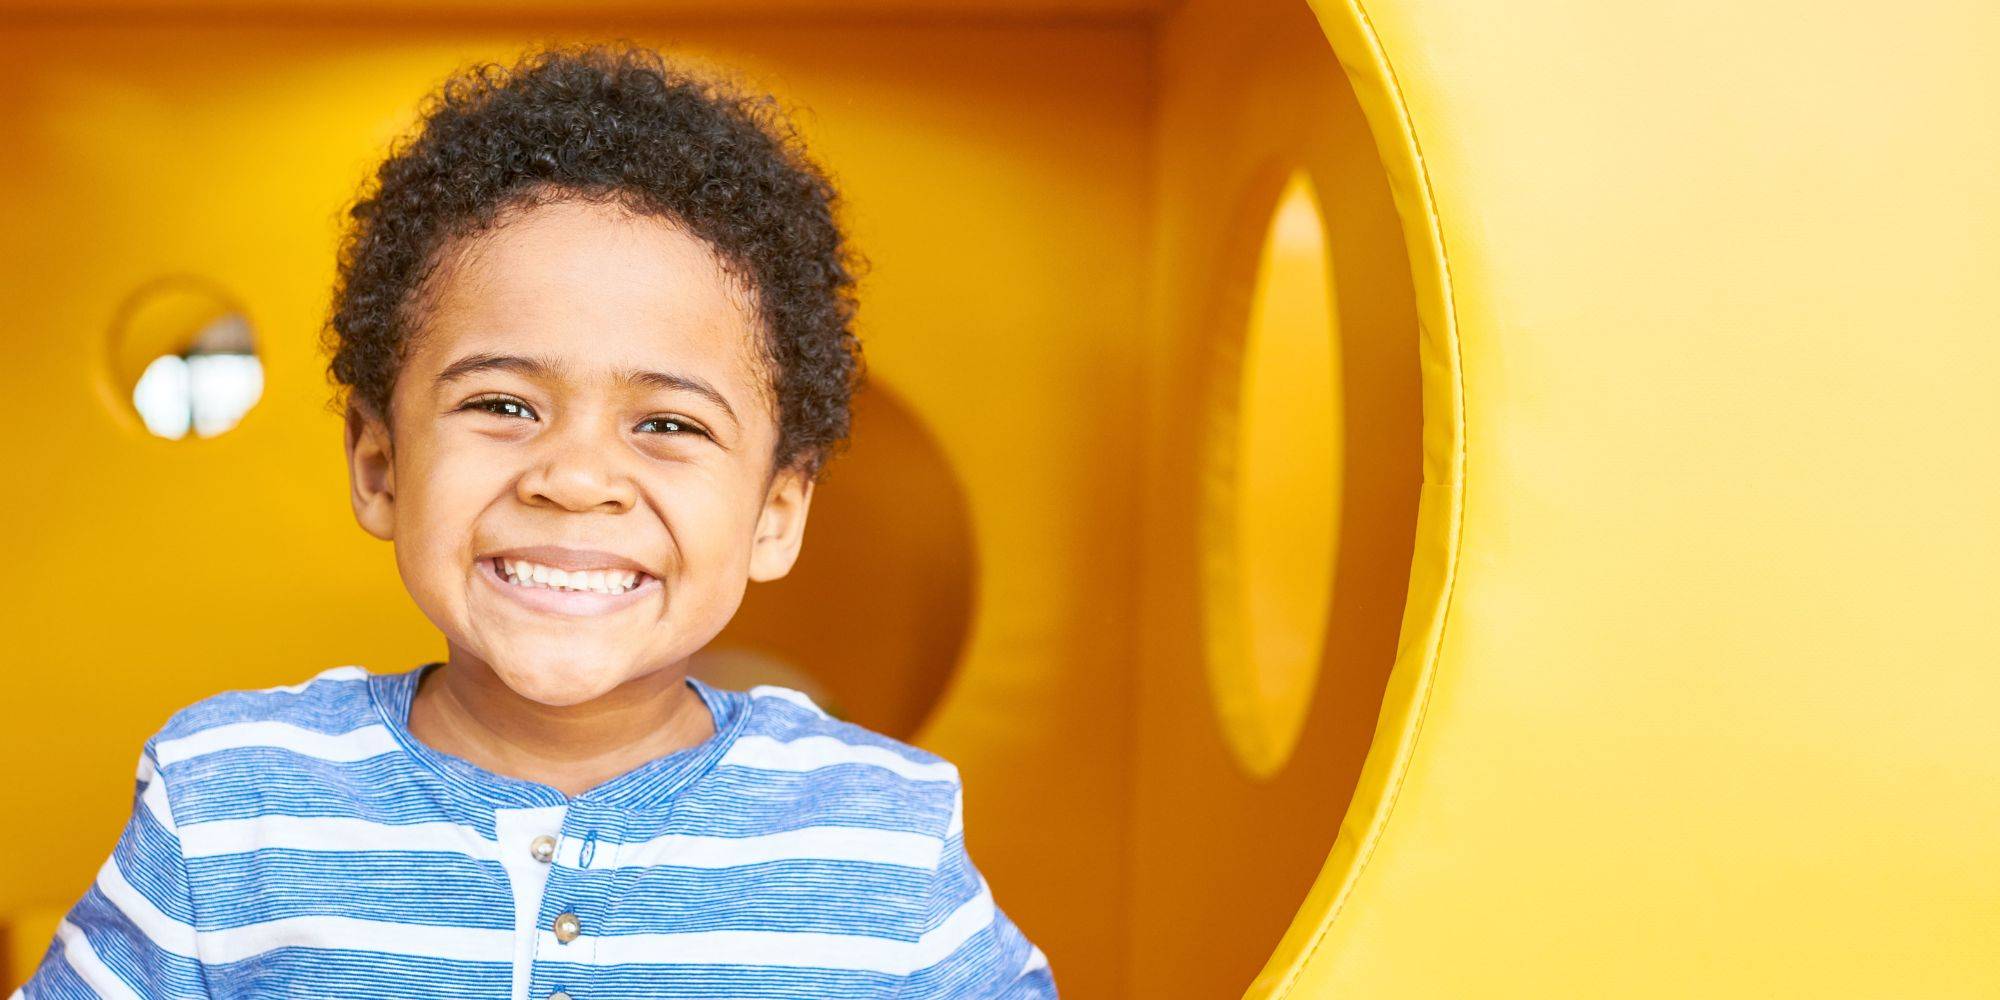 smiling boy with in yellow play area